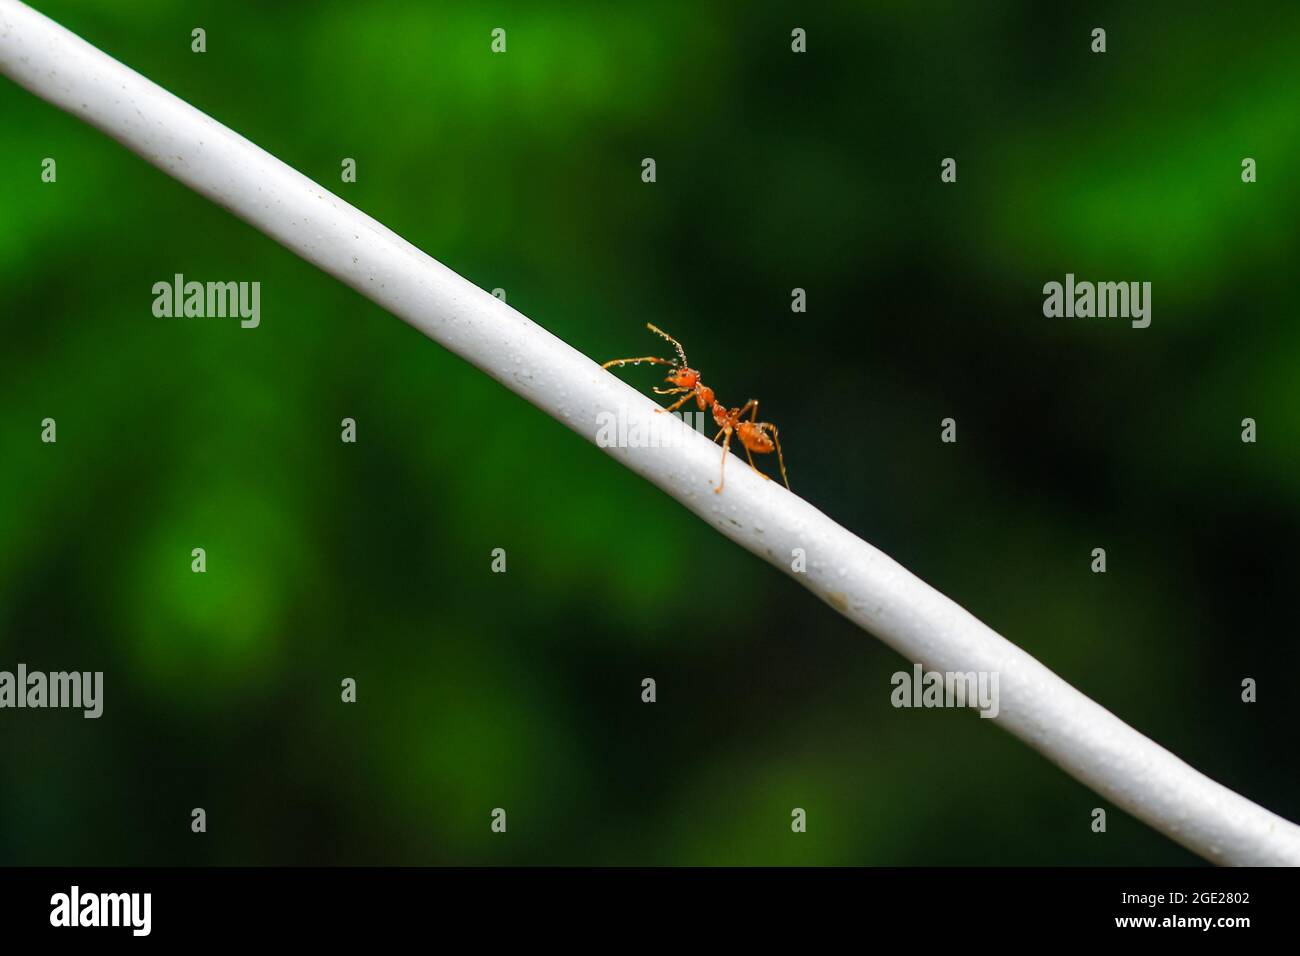 Shot near the red ant, climb the rope. Ants on rope blur background. Red ant collecting water on a rope. Stock Photo